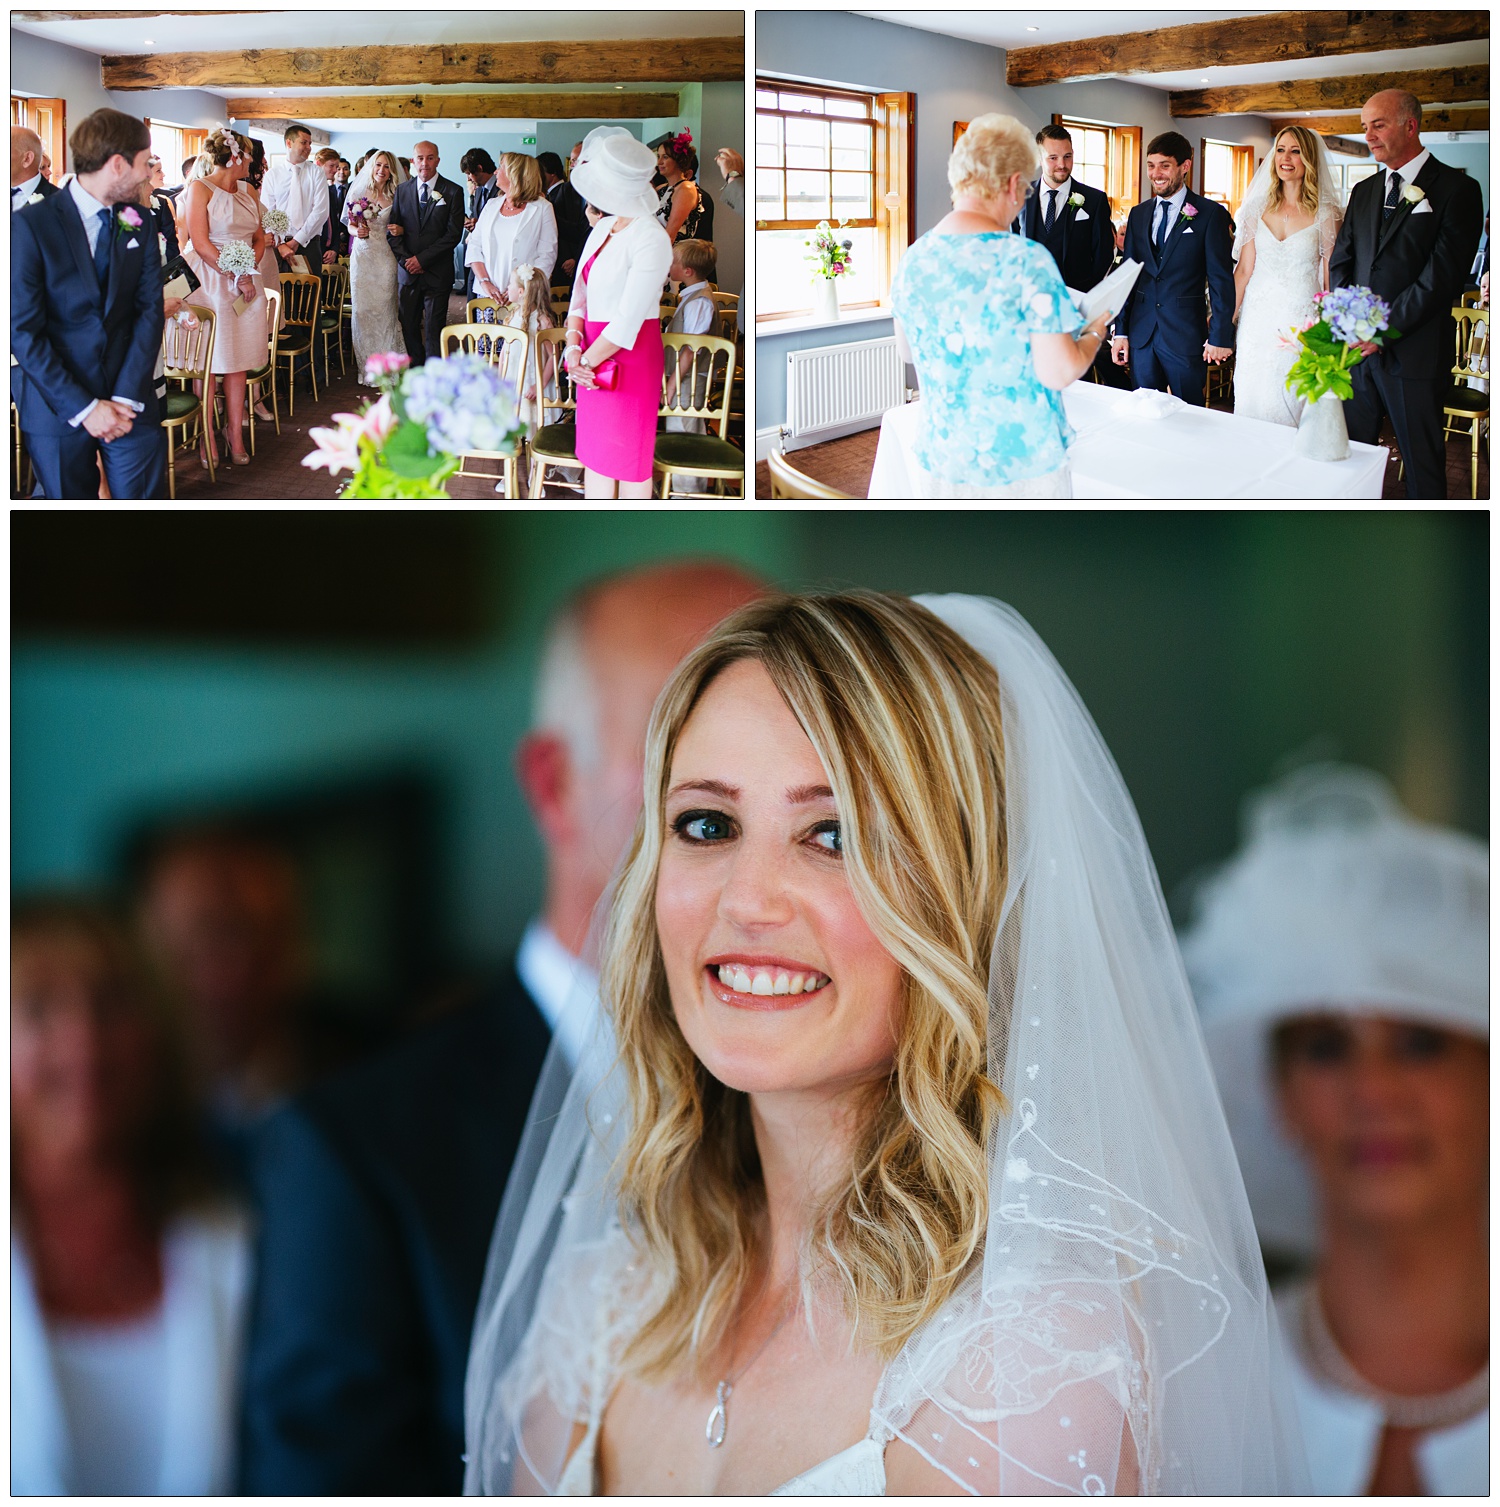 A ceremony at the Inn at Whitewell. The bride smiles at the camera.